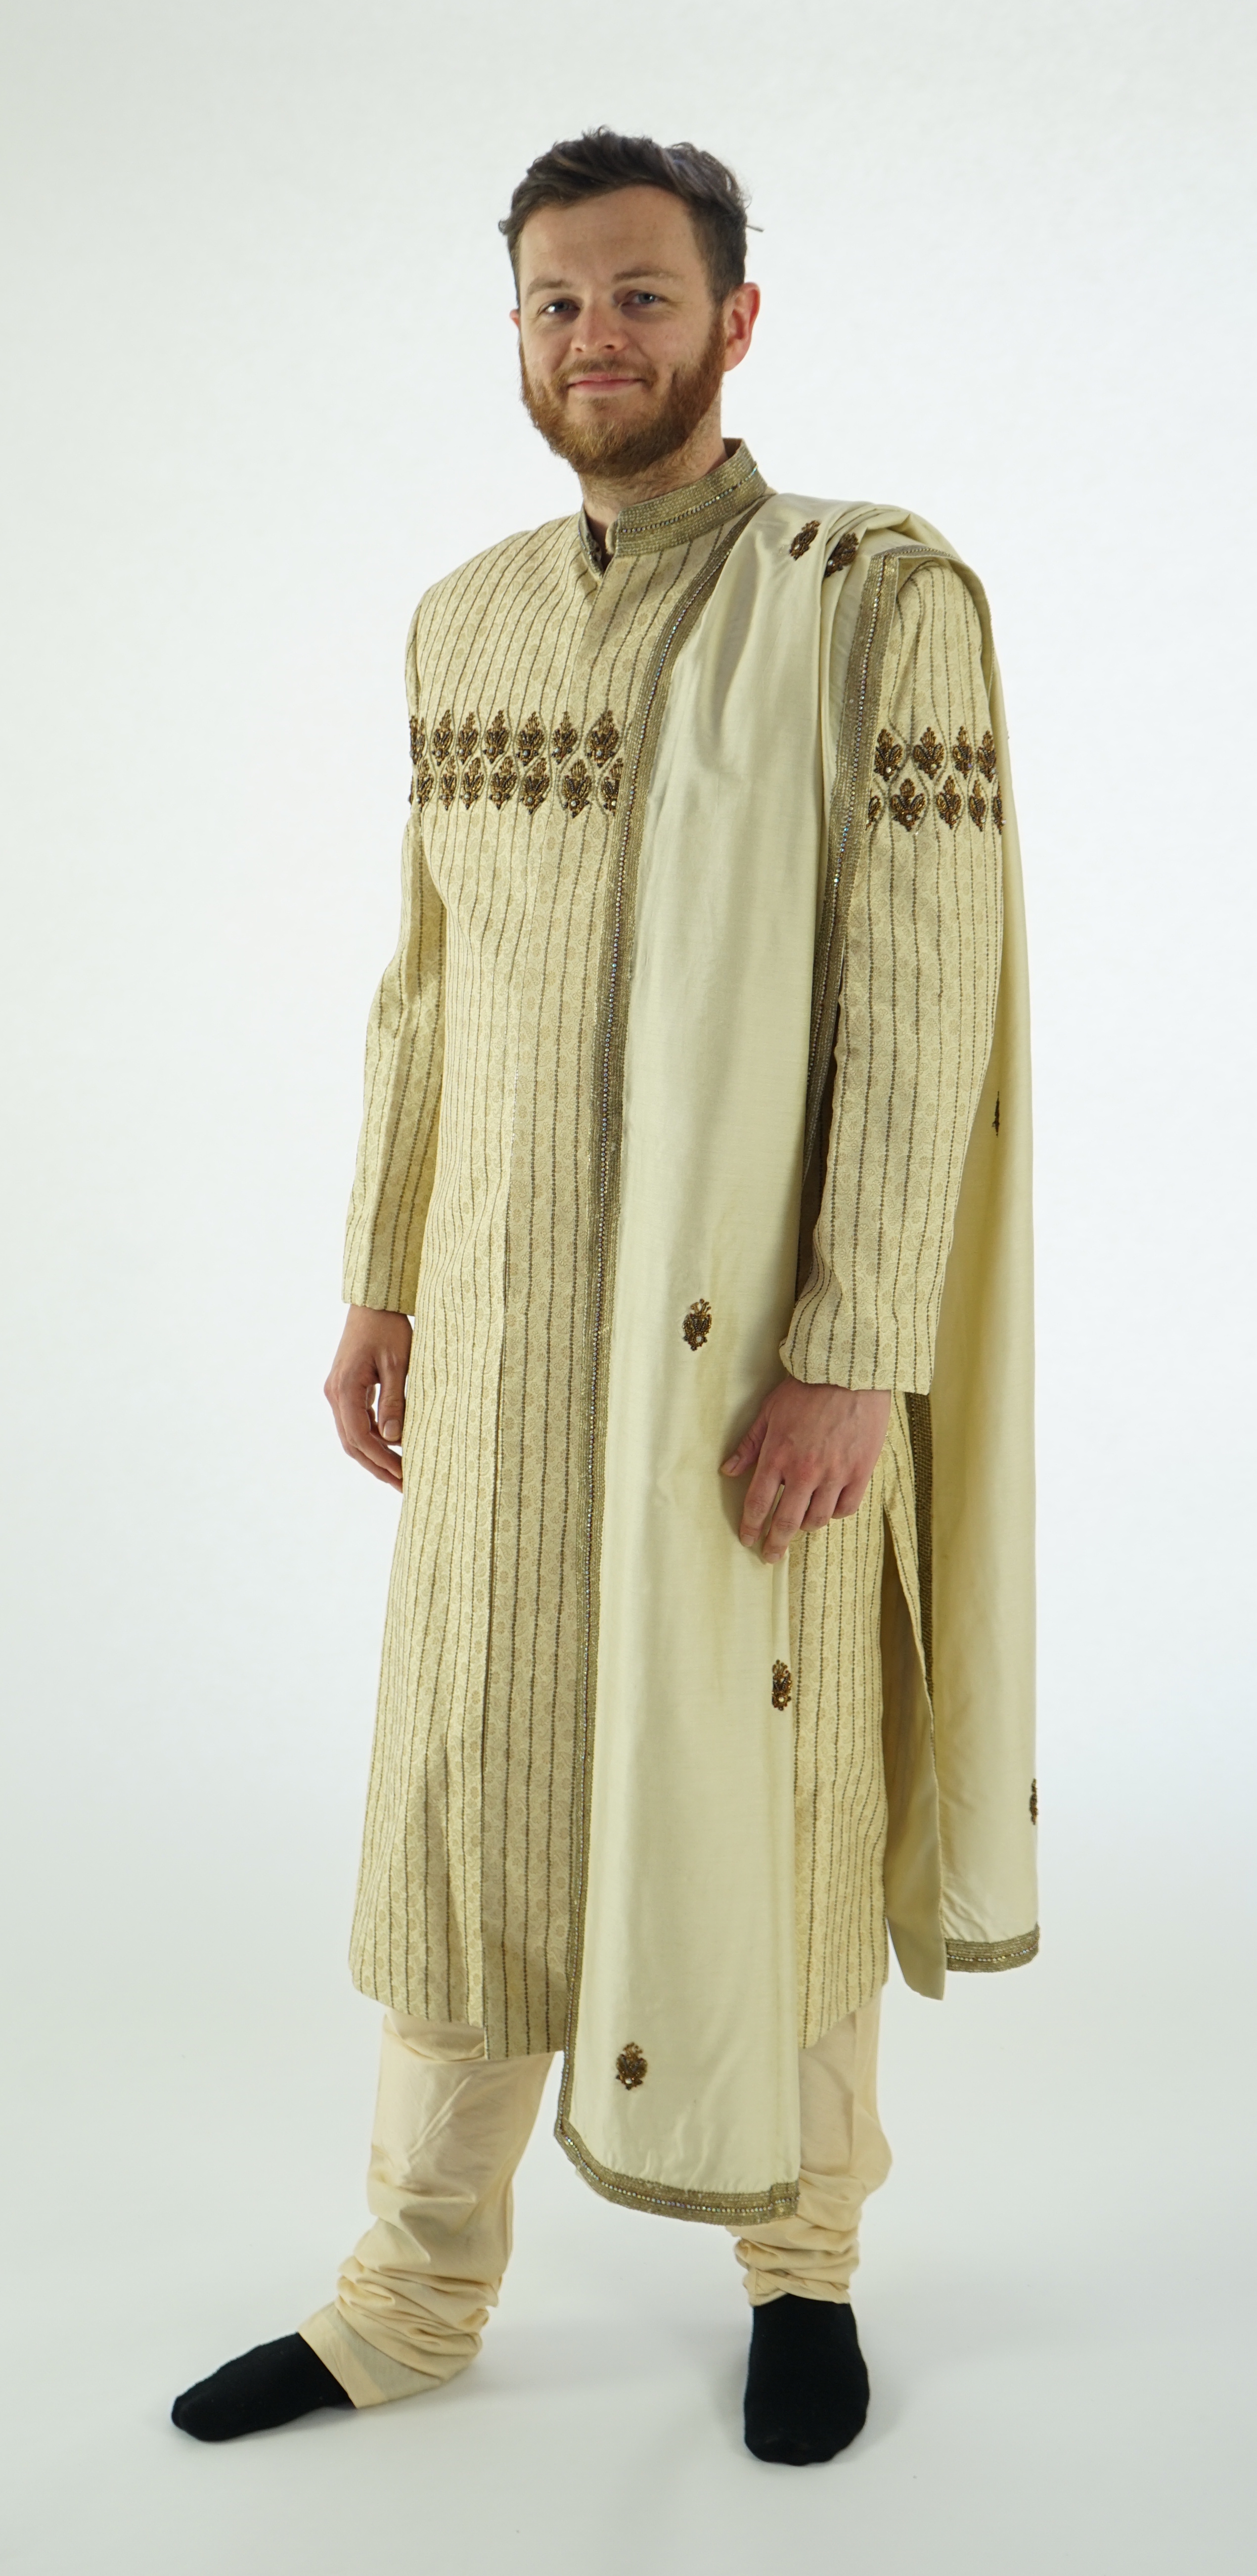 A modern Indian Men's wedding frock coat and trousers. Ex London Festival Opera - 'The Magic Flute'